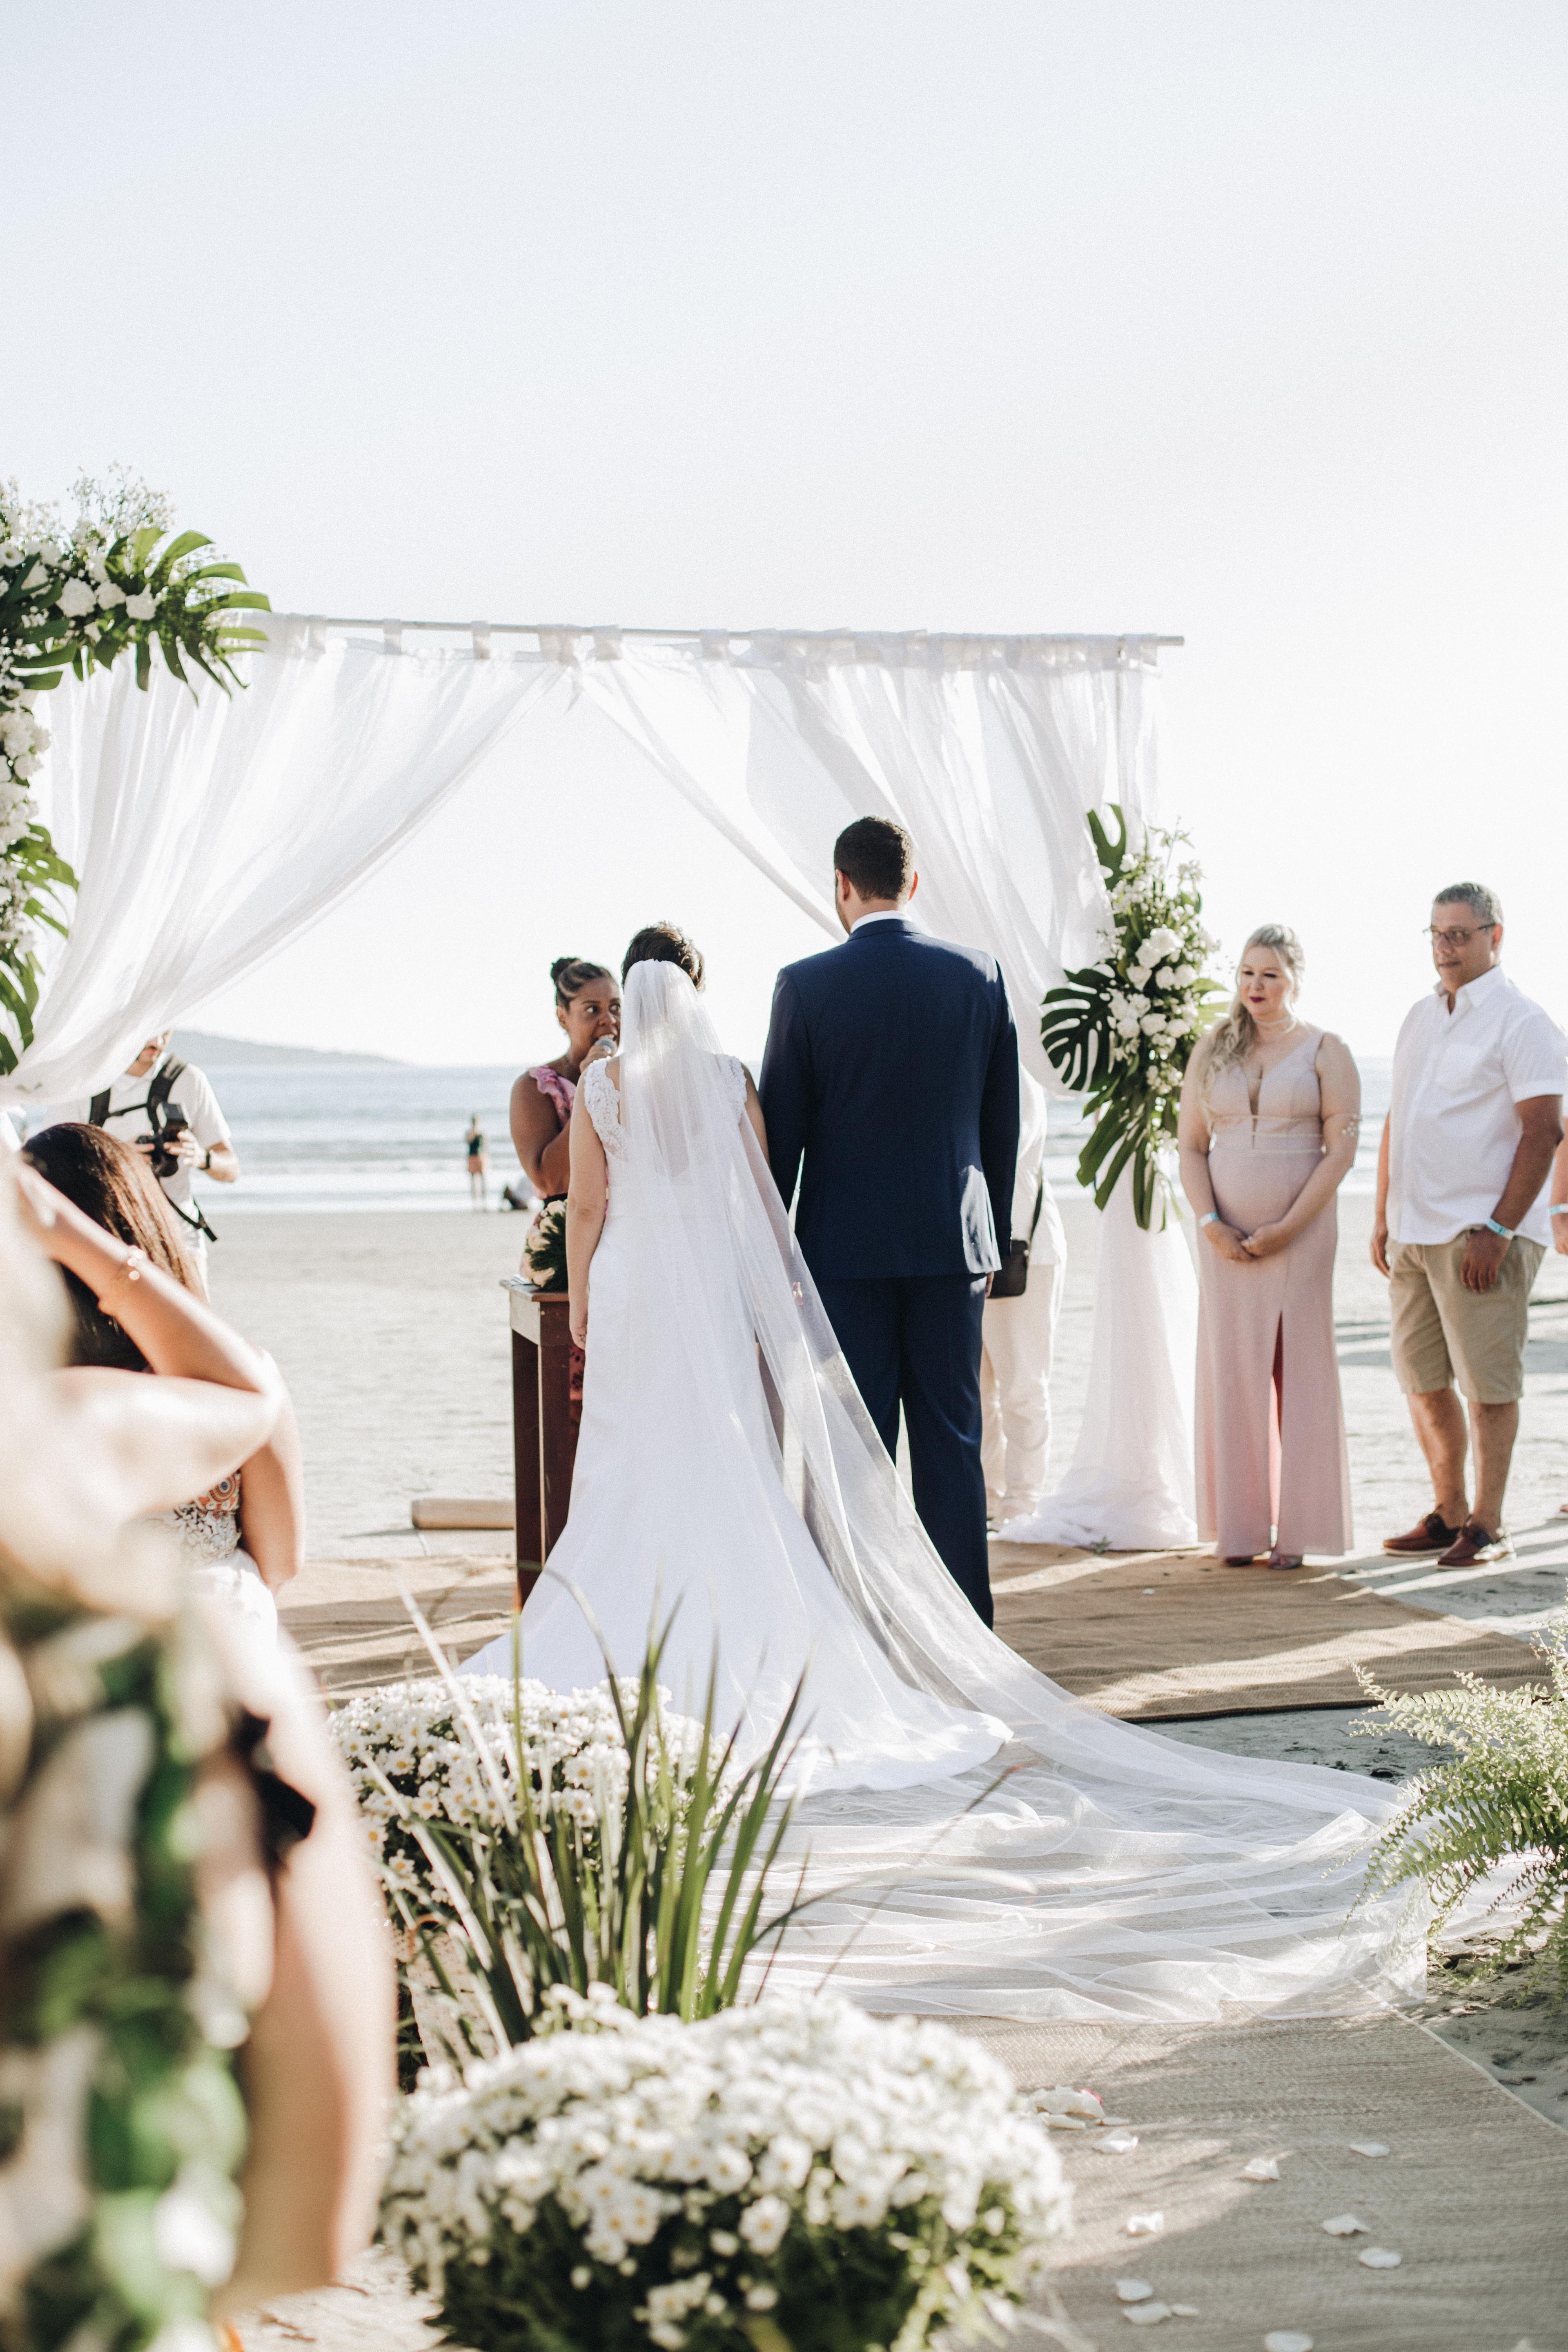 Sandee - Blog / Beach Wedding Planning 101 - Essential Tips for Pulling Off a Seaside Ceremony